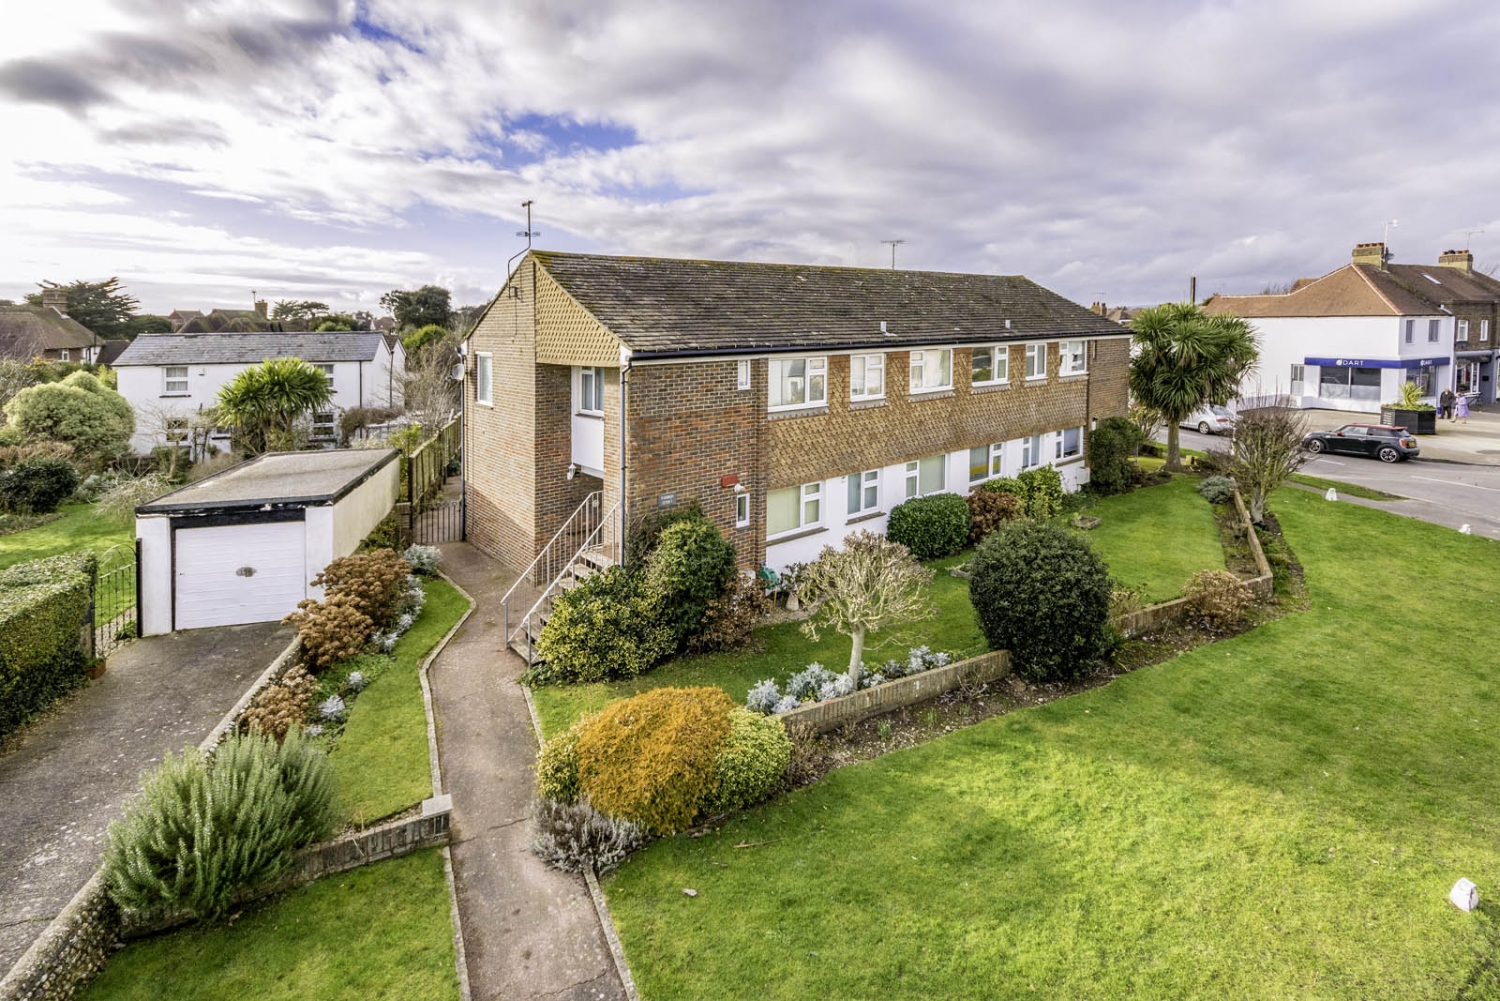 Forbon Court, Sea Road, East Preston - a success story (ref EP21235951)